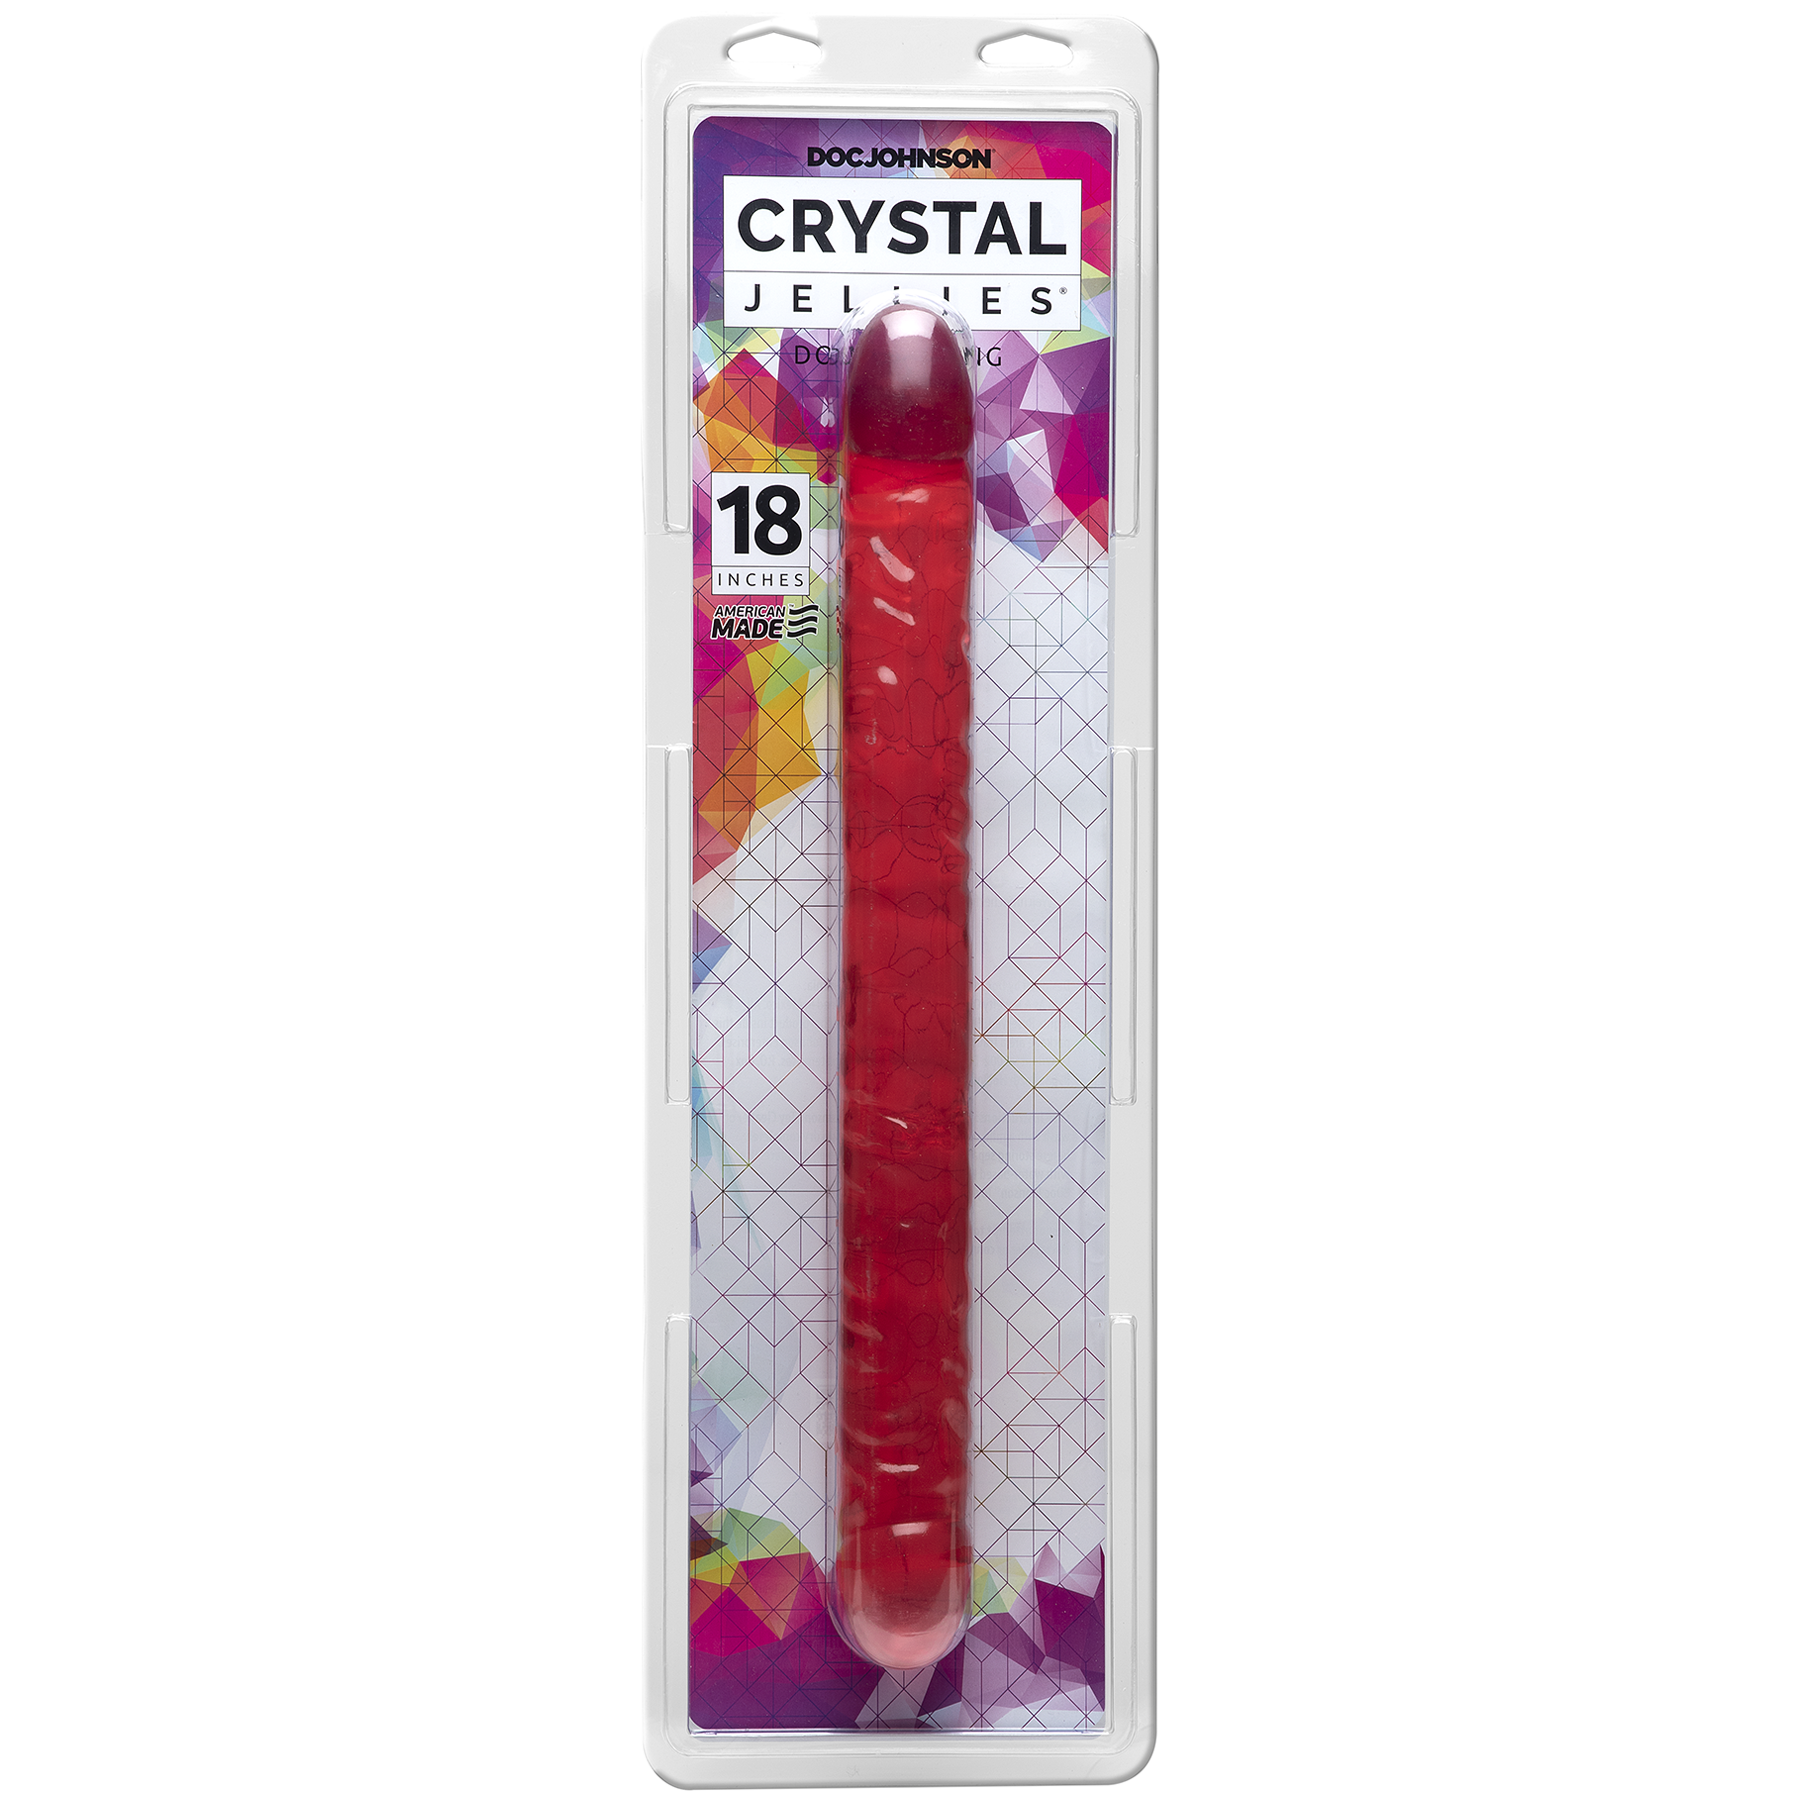 Experience Double the Pleasure with Doc Johnson's 18" Crystal Jellies Double Dong - Phthalate-Free - Available in Pink, Clear and Purple